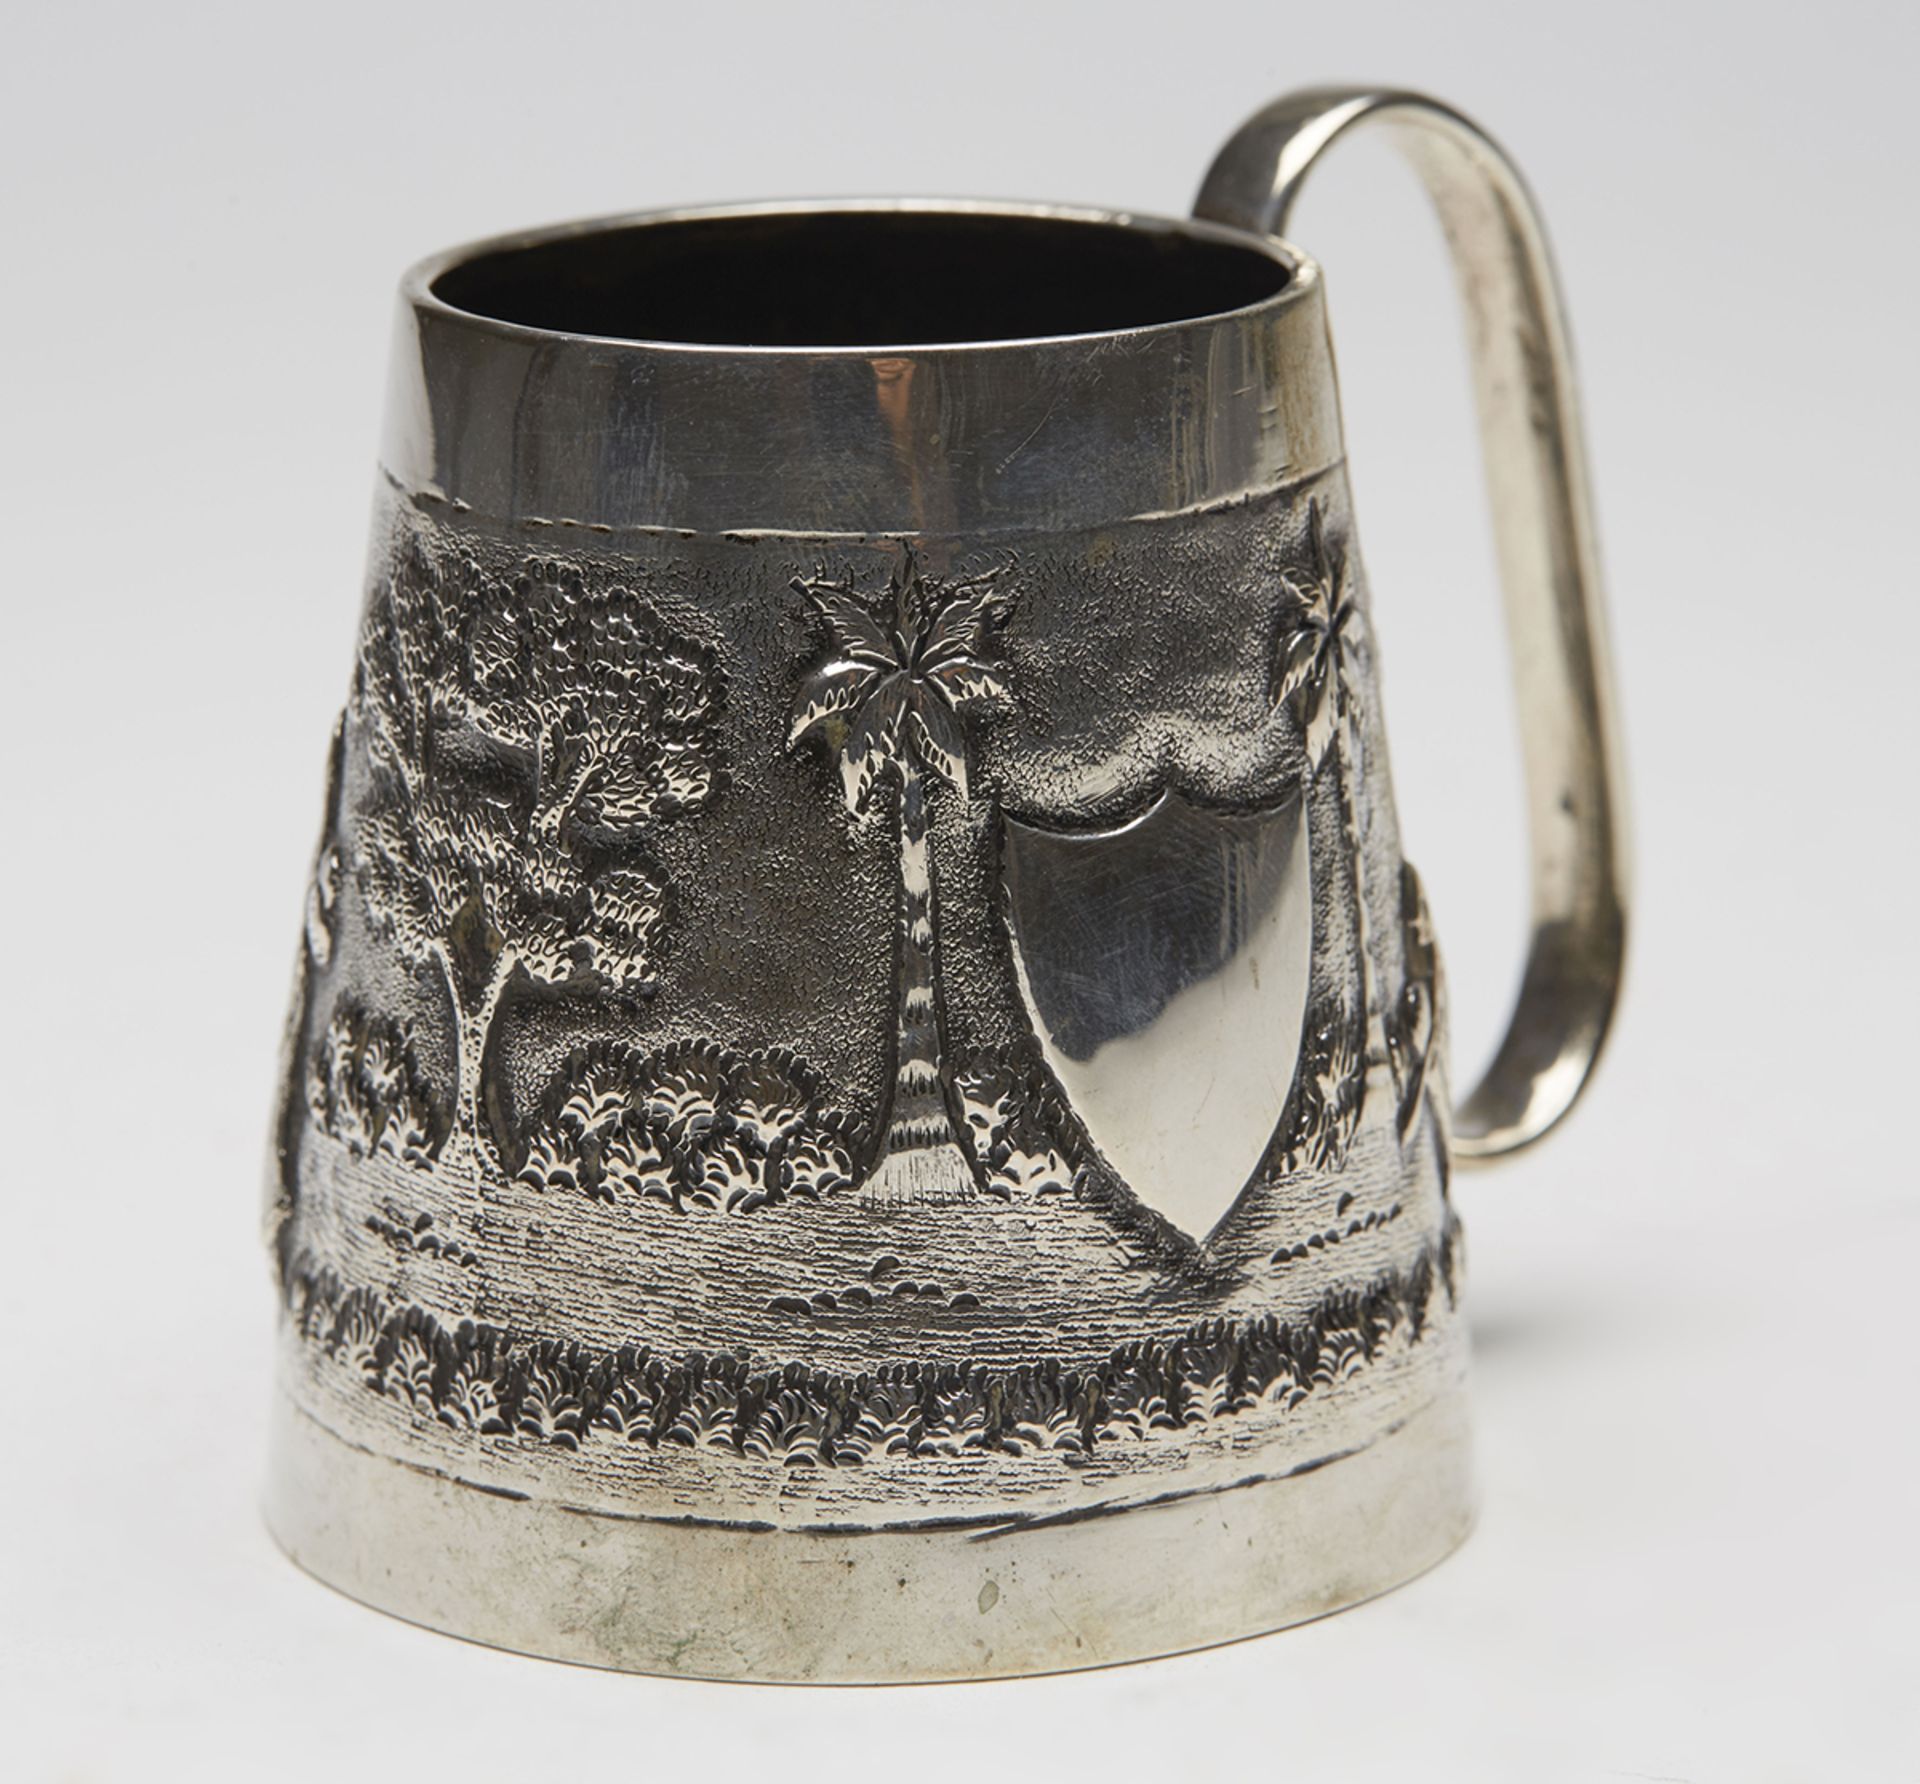 Vintage South East Asian Silver Presentation Cup 20Th C.